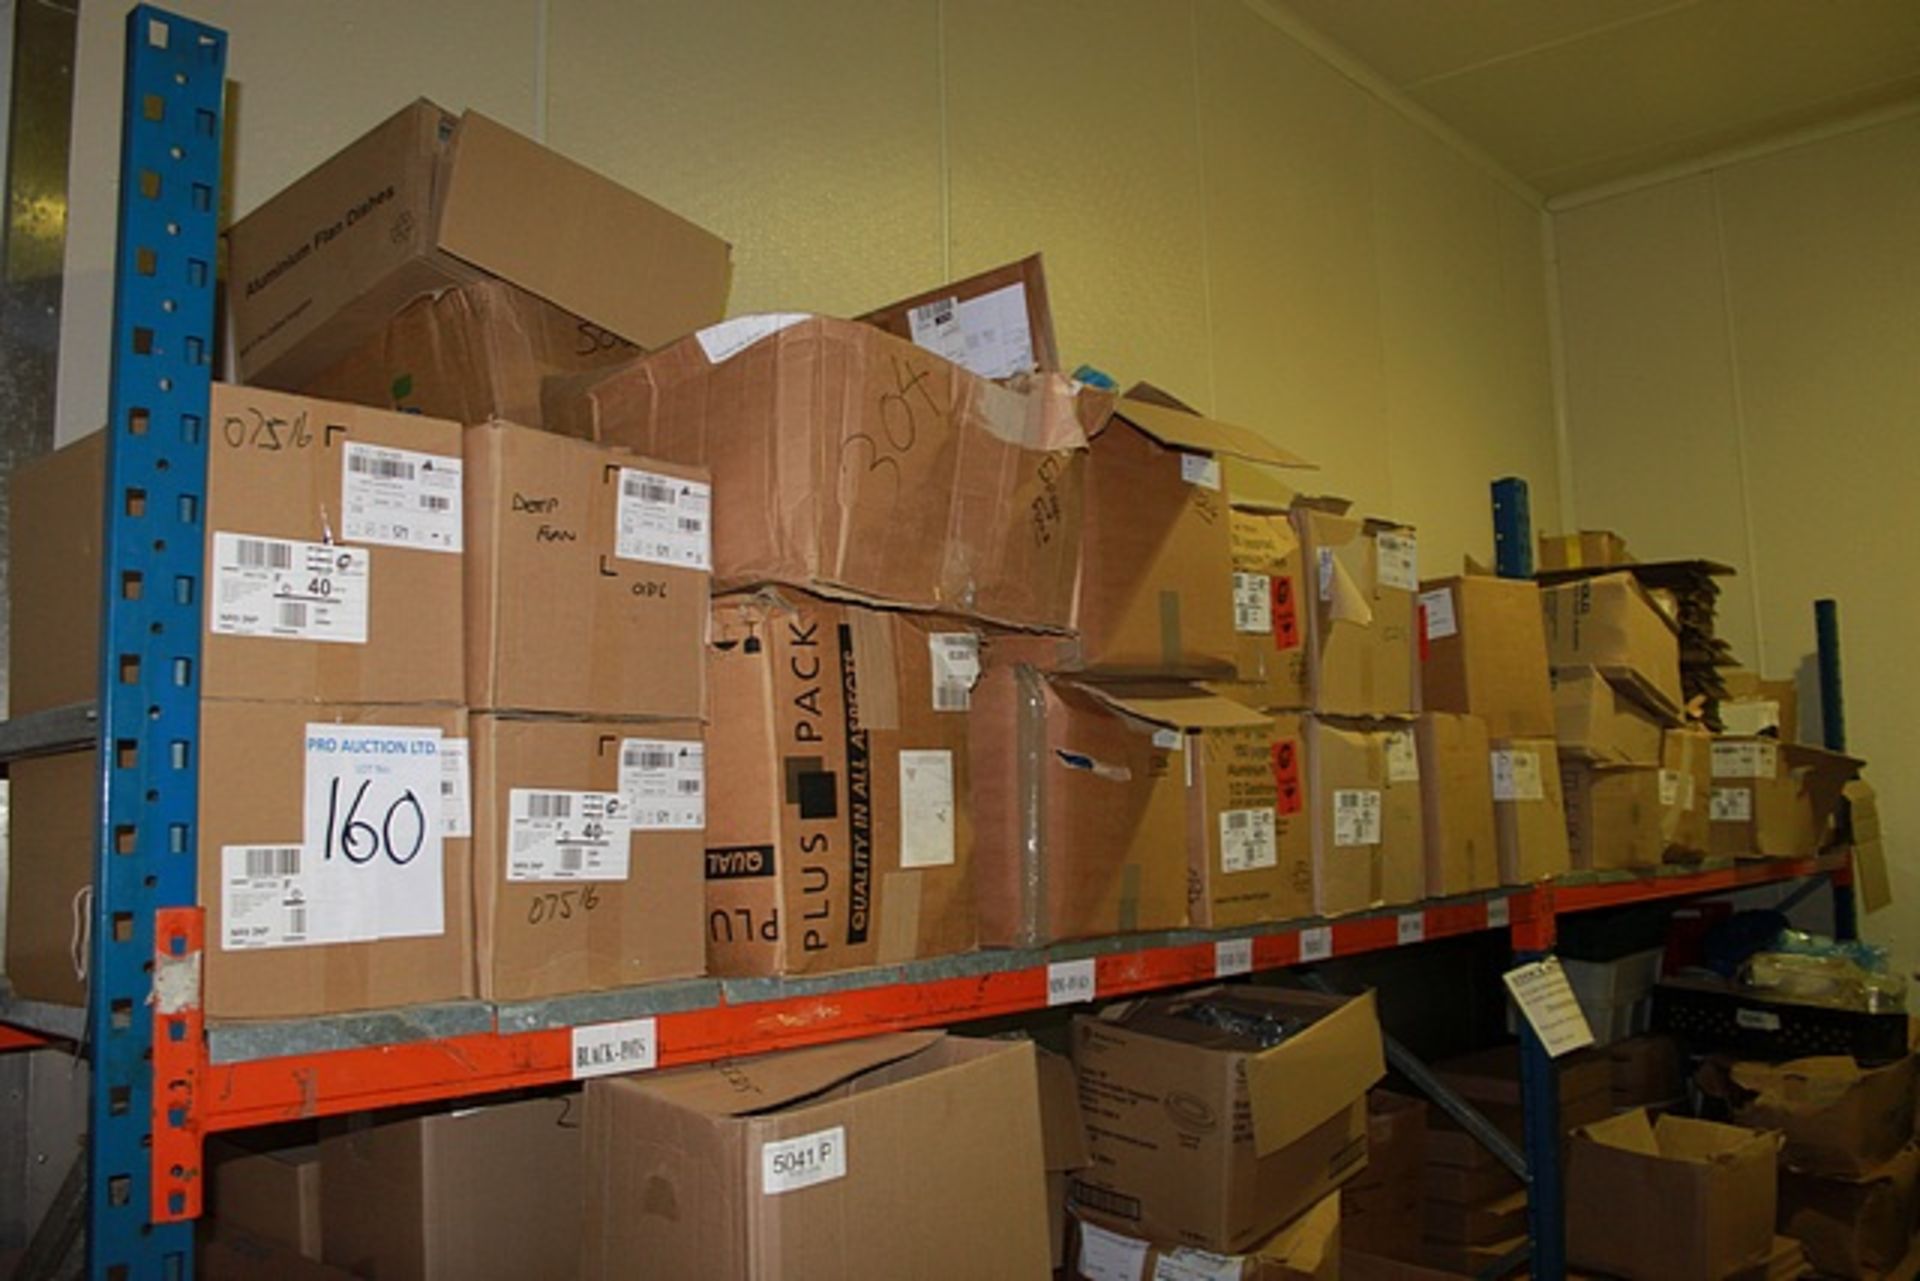 A large quantity of packaging materials as found, comprising foils, tins, portion cups and boxes